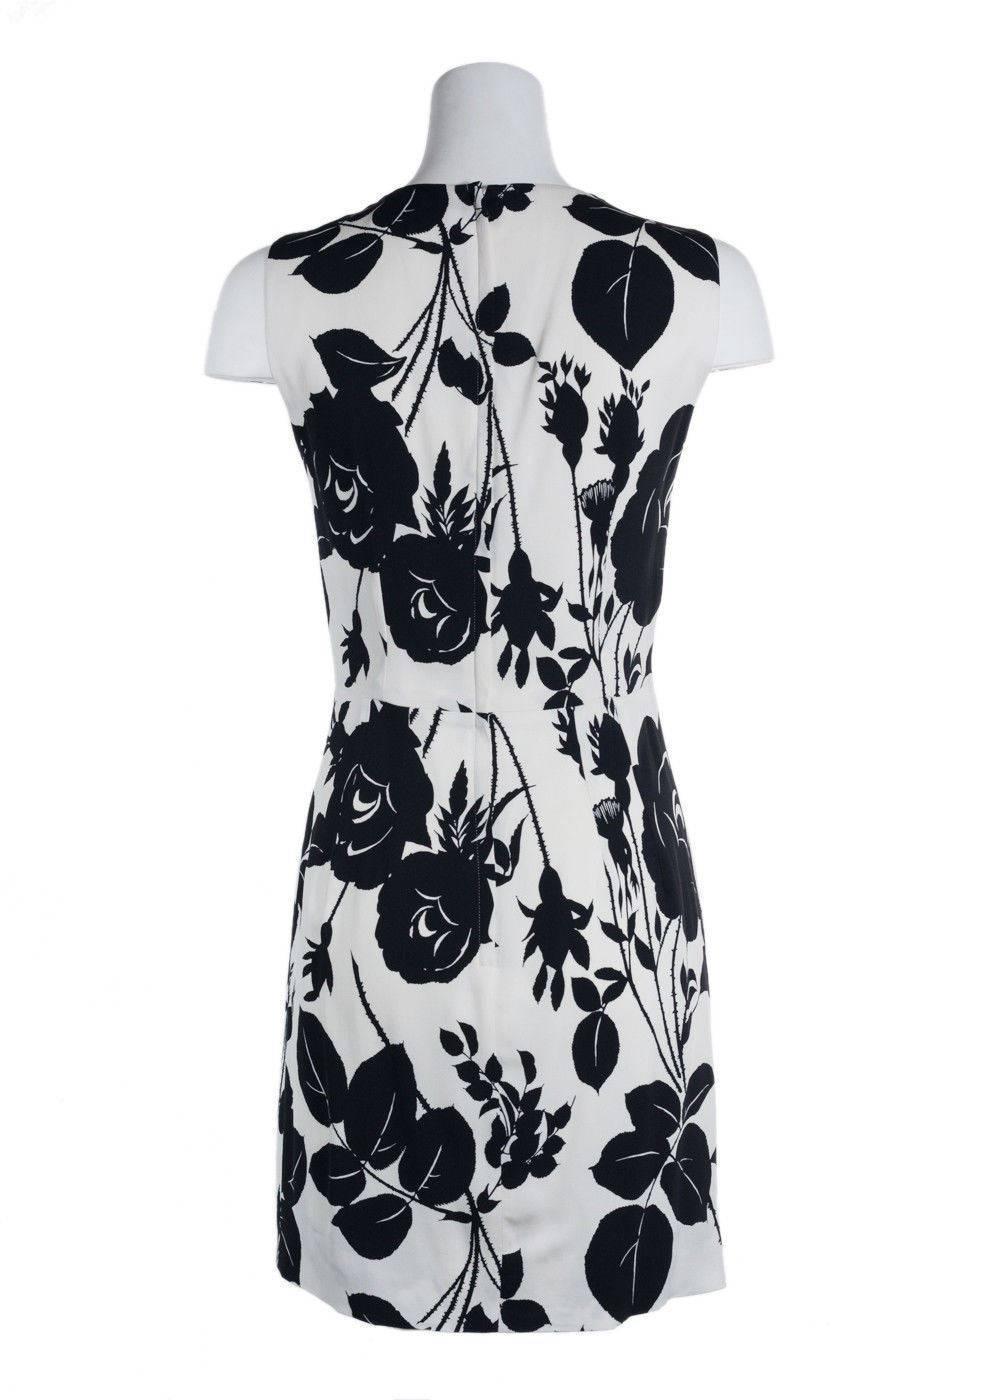 Gray Dolce&Gabbana Black and White Floral Embroidered Sleeveless Dress